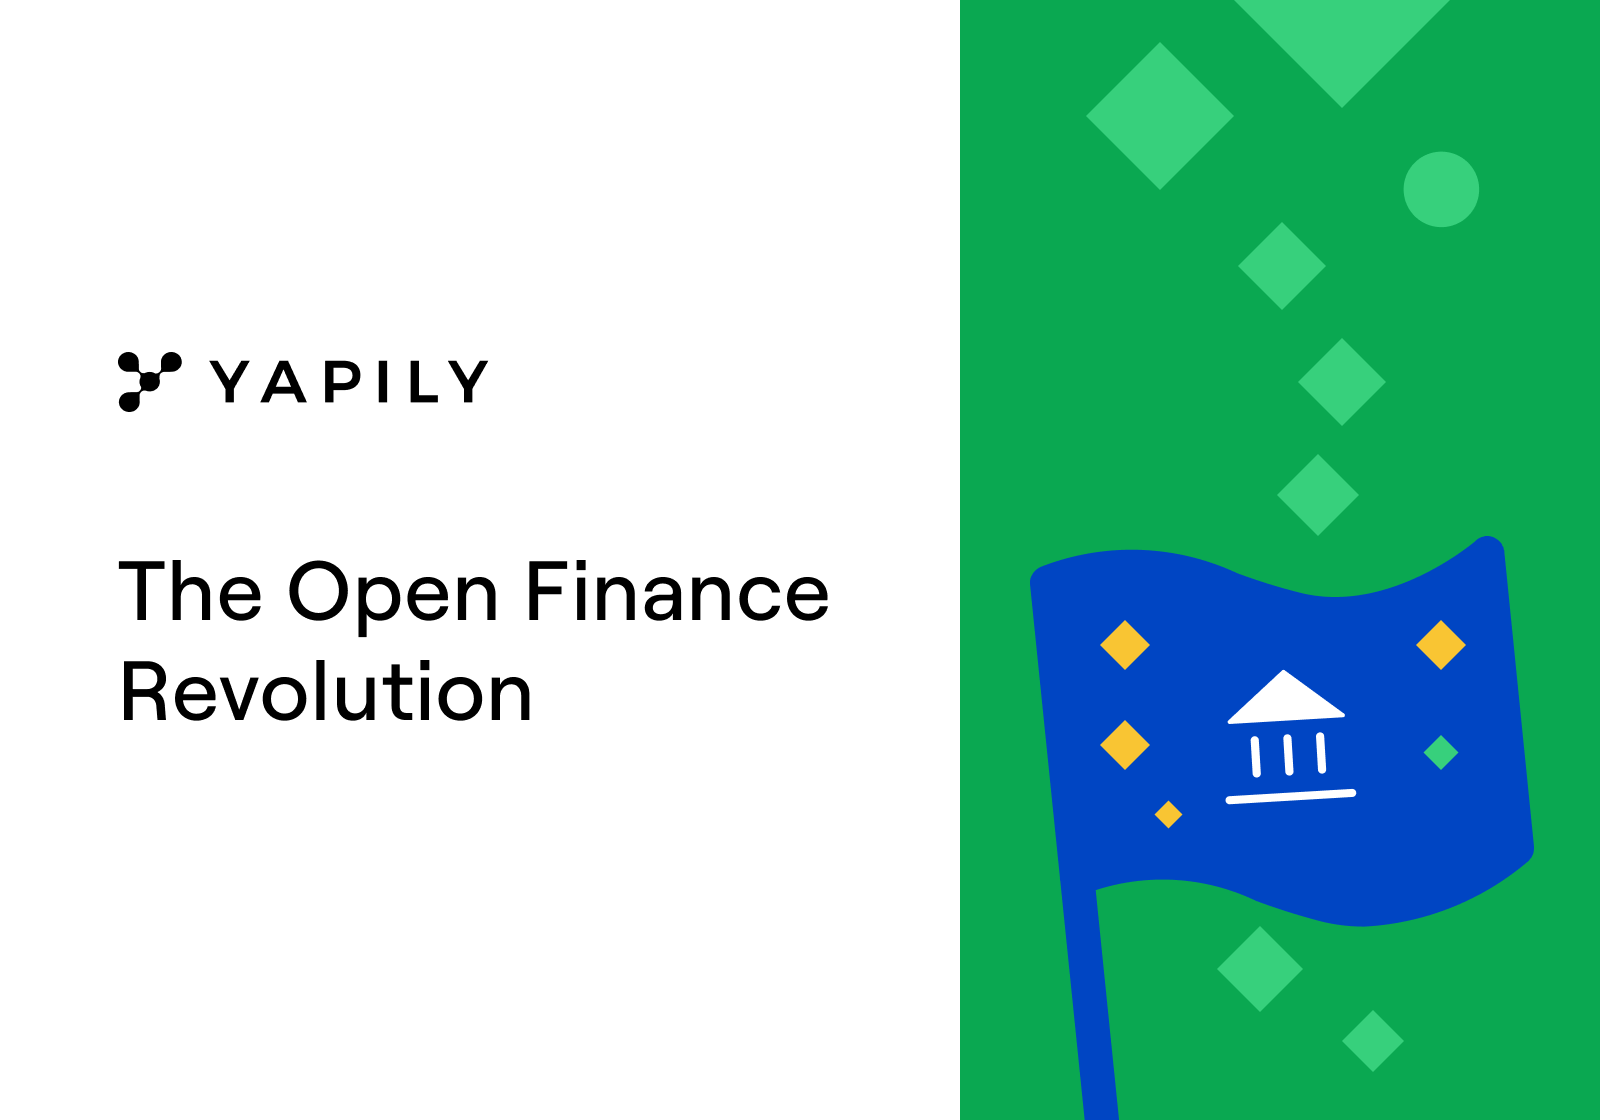 Open Banking has only opened up current account information, which was a substantial first step, but it is not sufficient to enable customers to fully plan their finances or have full control over their financial decisions. How can Open Finance help?